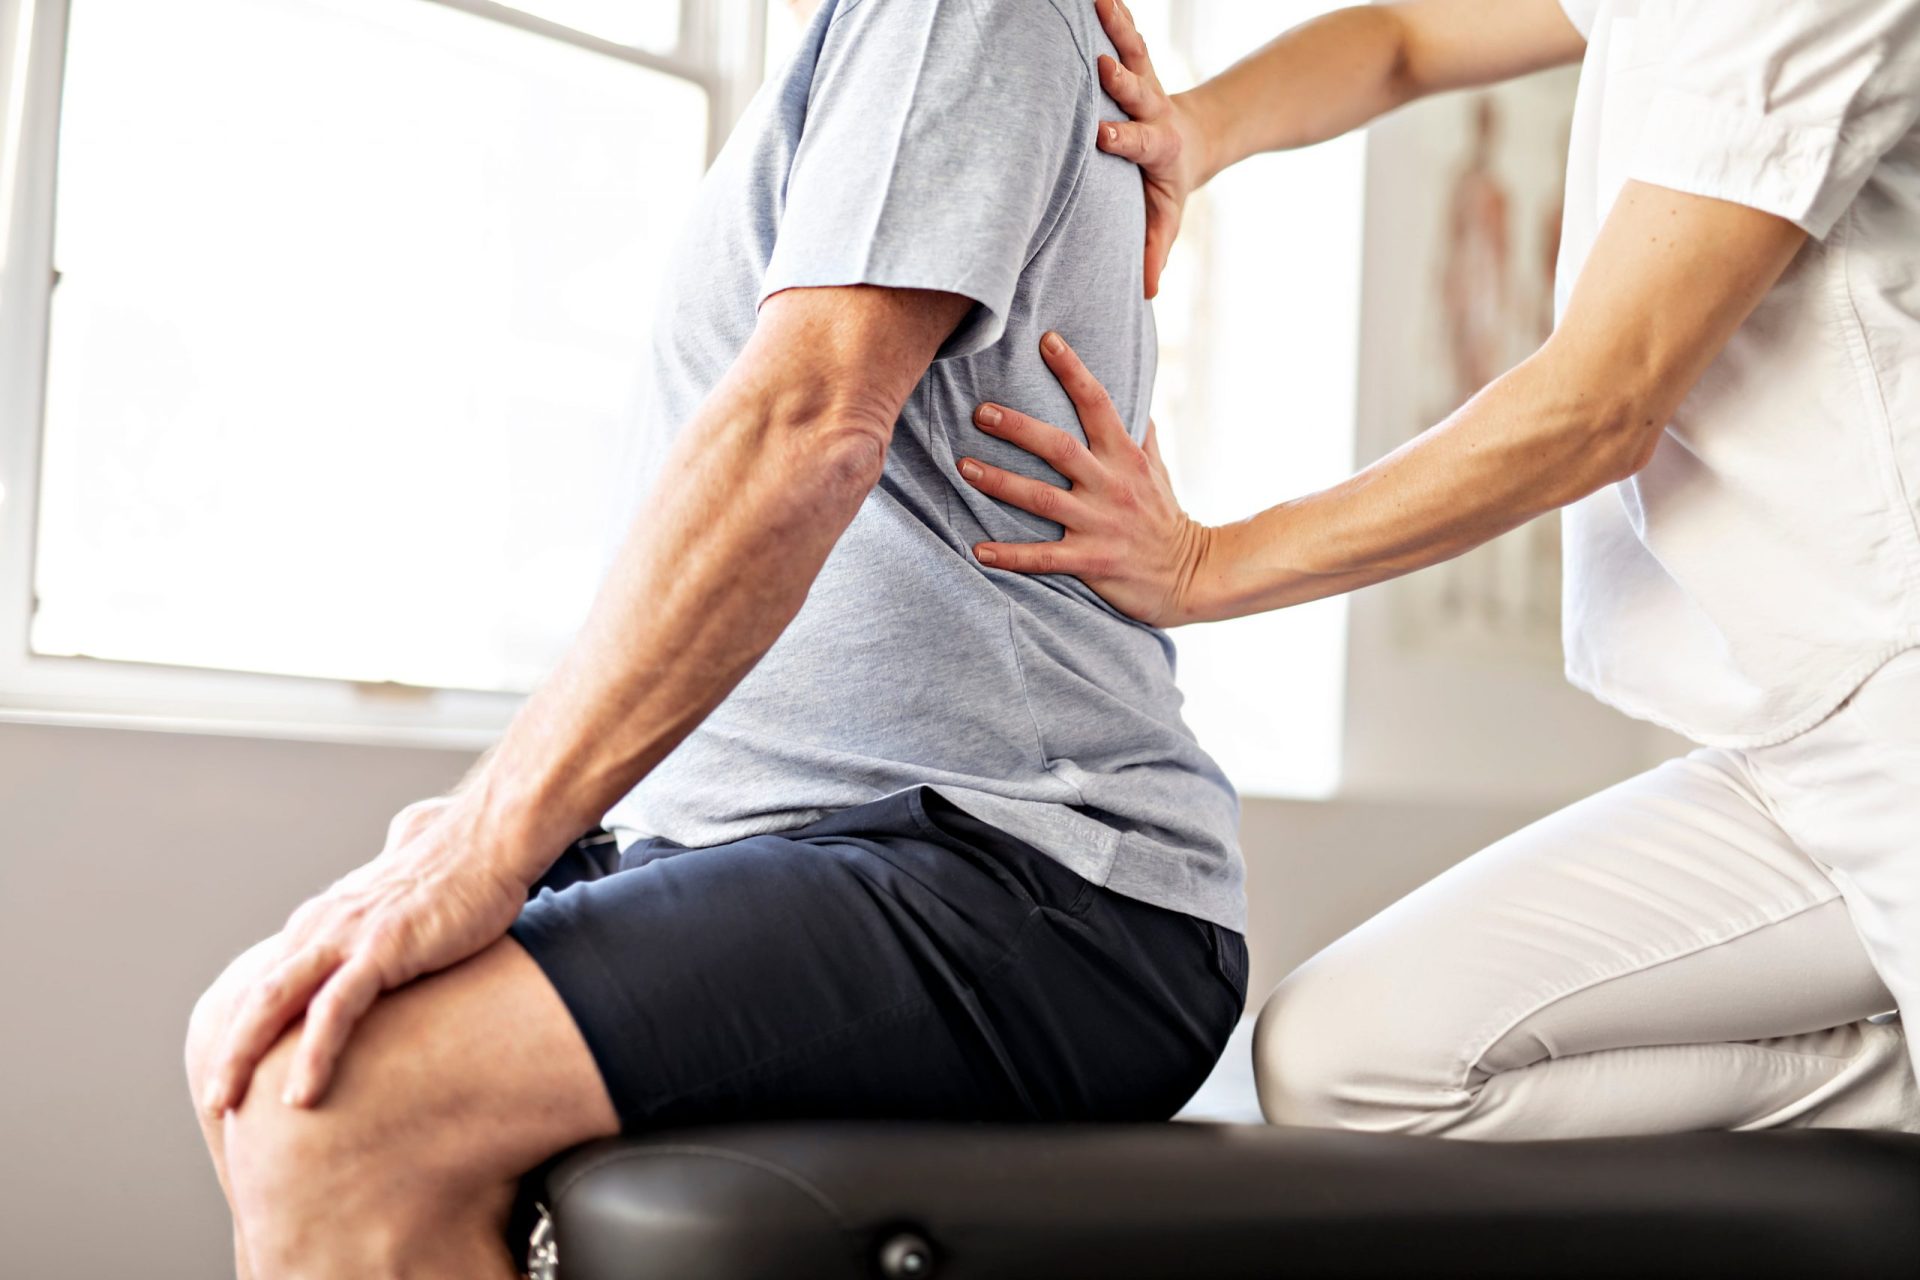 Evidence-Based Treatments for Sciatica